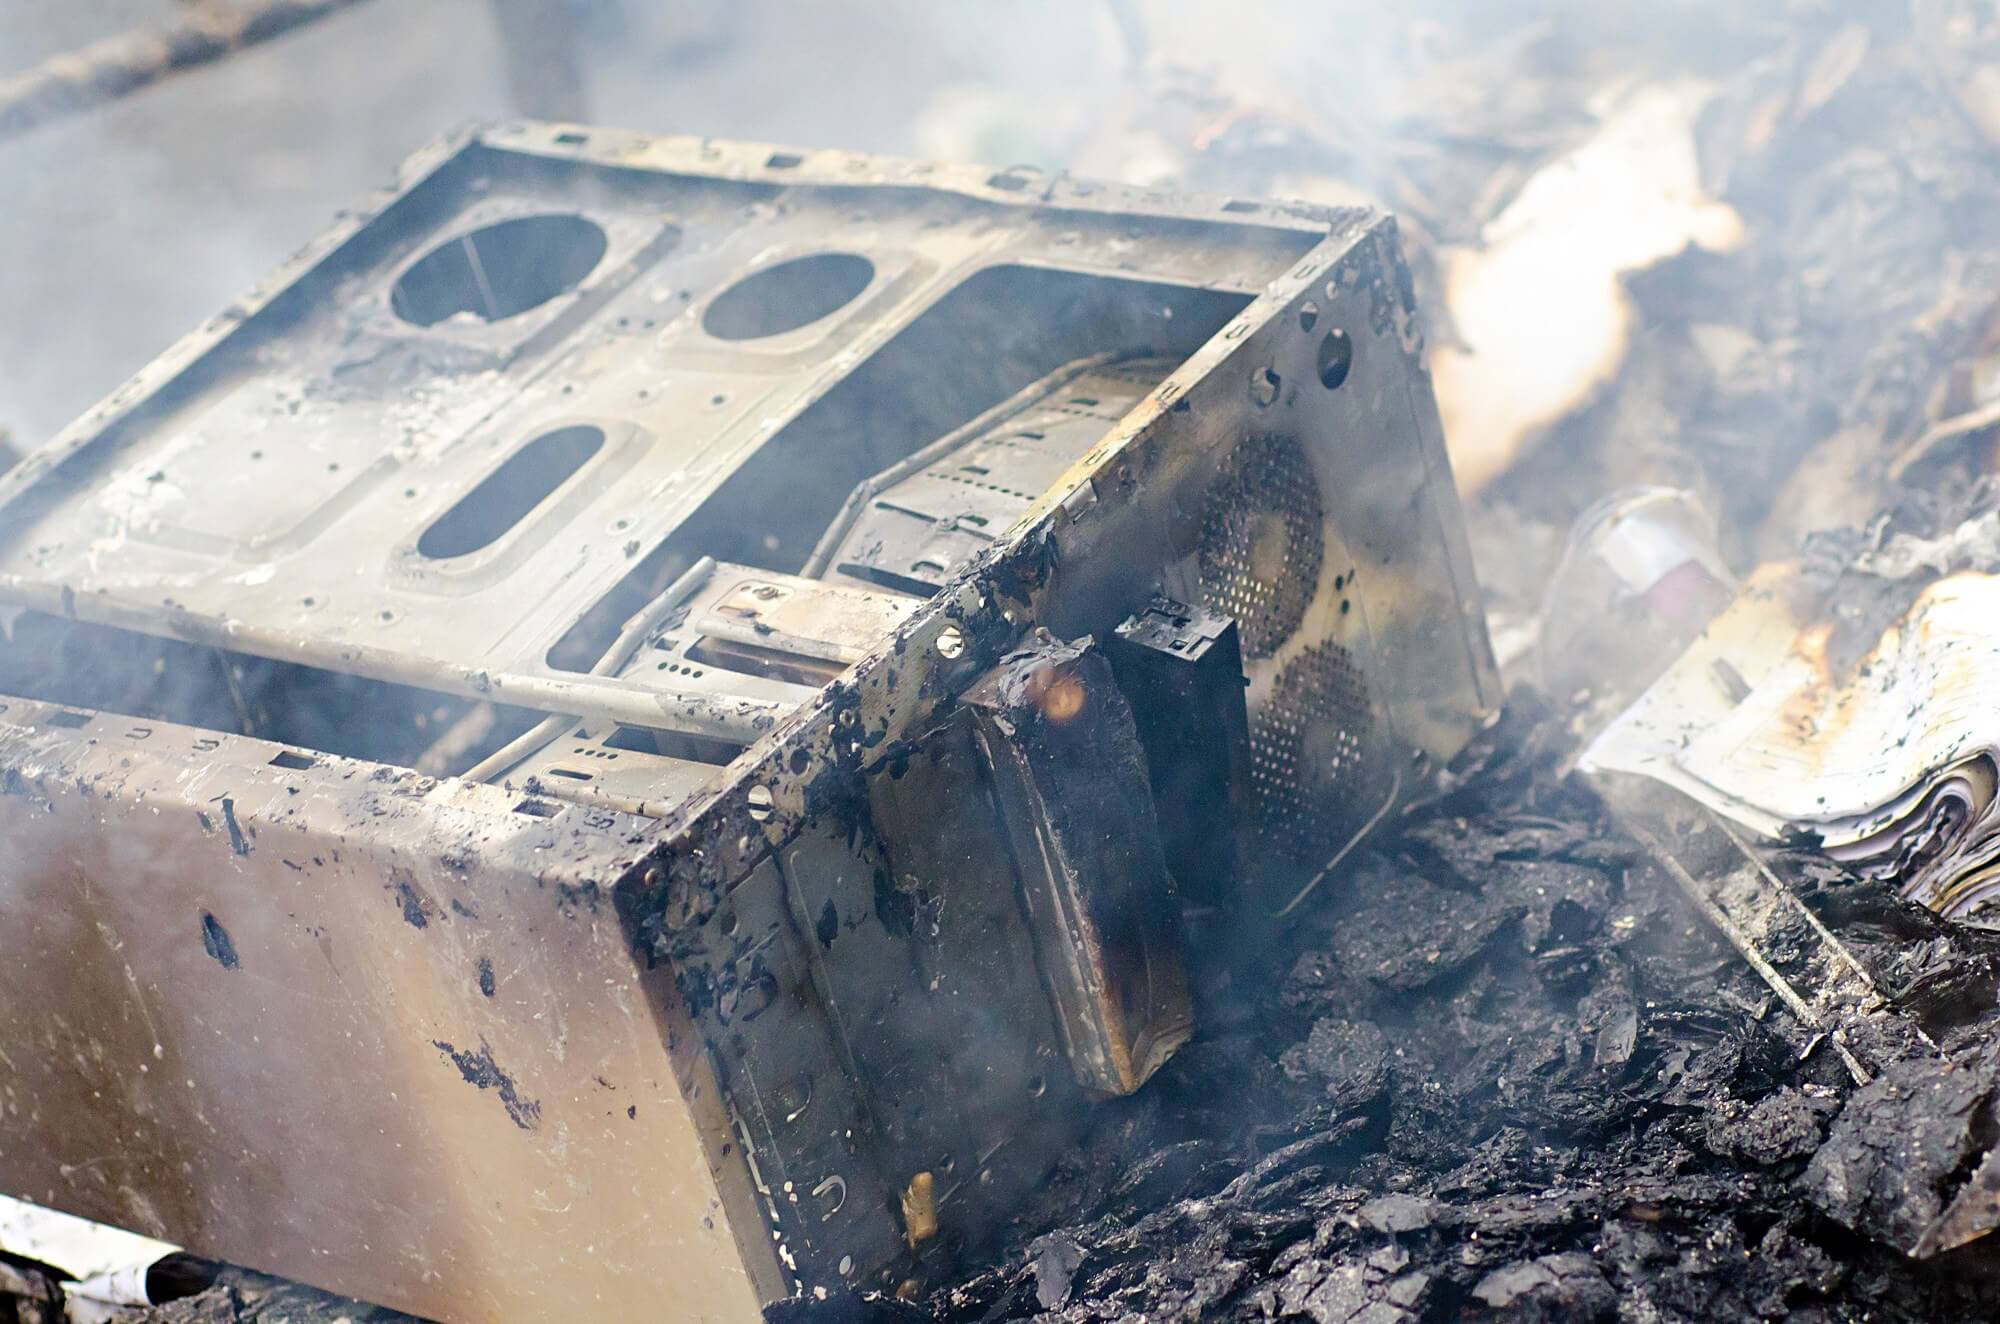 Twitch streamer's PC build goes up in smoke